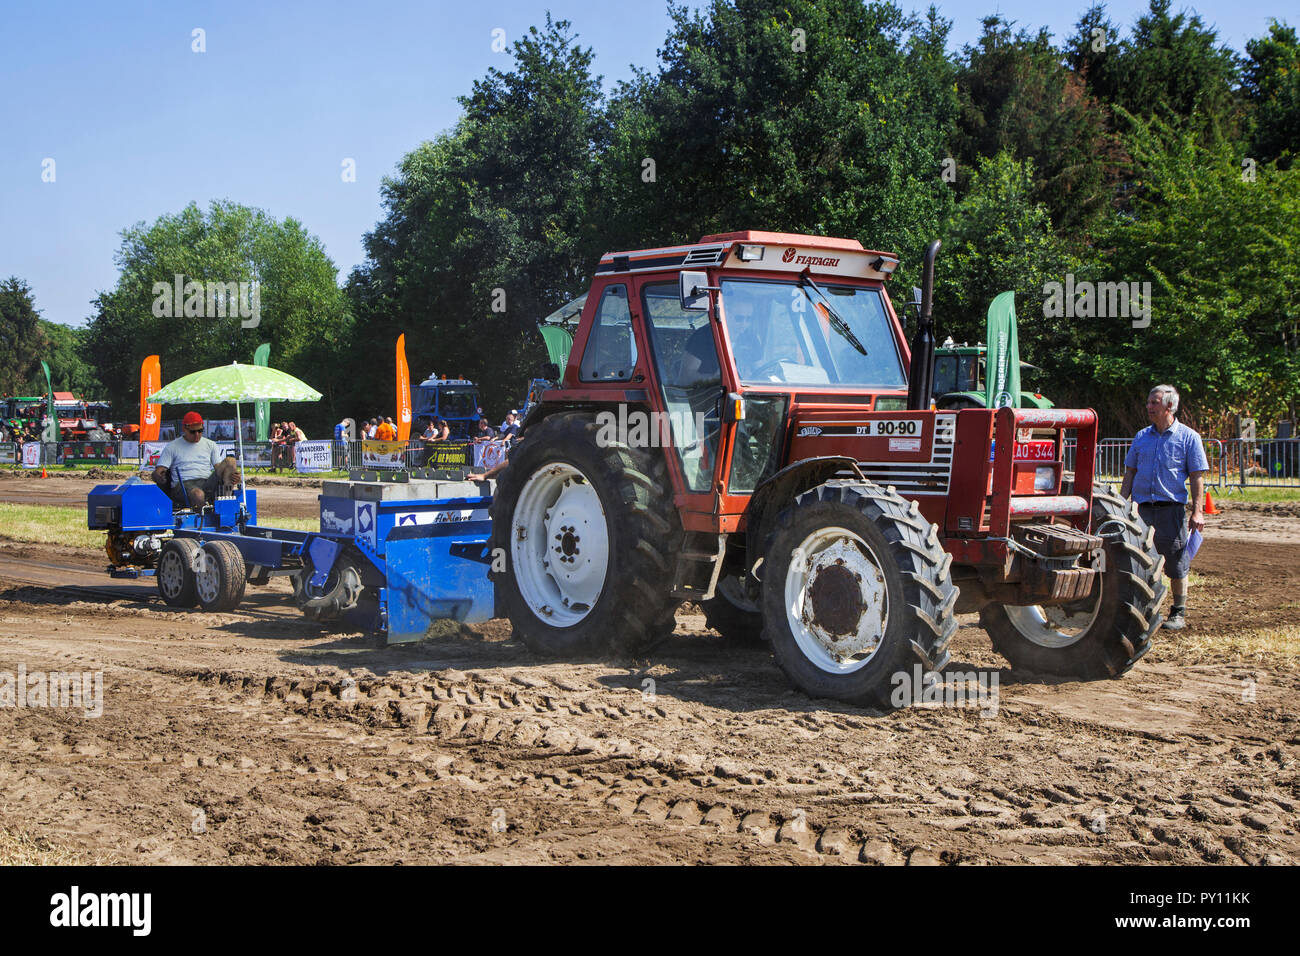 Non-modified tractor Fiat / Fiatagri 90-90 DT pulling heavy sled at Trekkertrek, tractor pulling competition in Zevergem, Flanders, Belgium Stock Photo